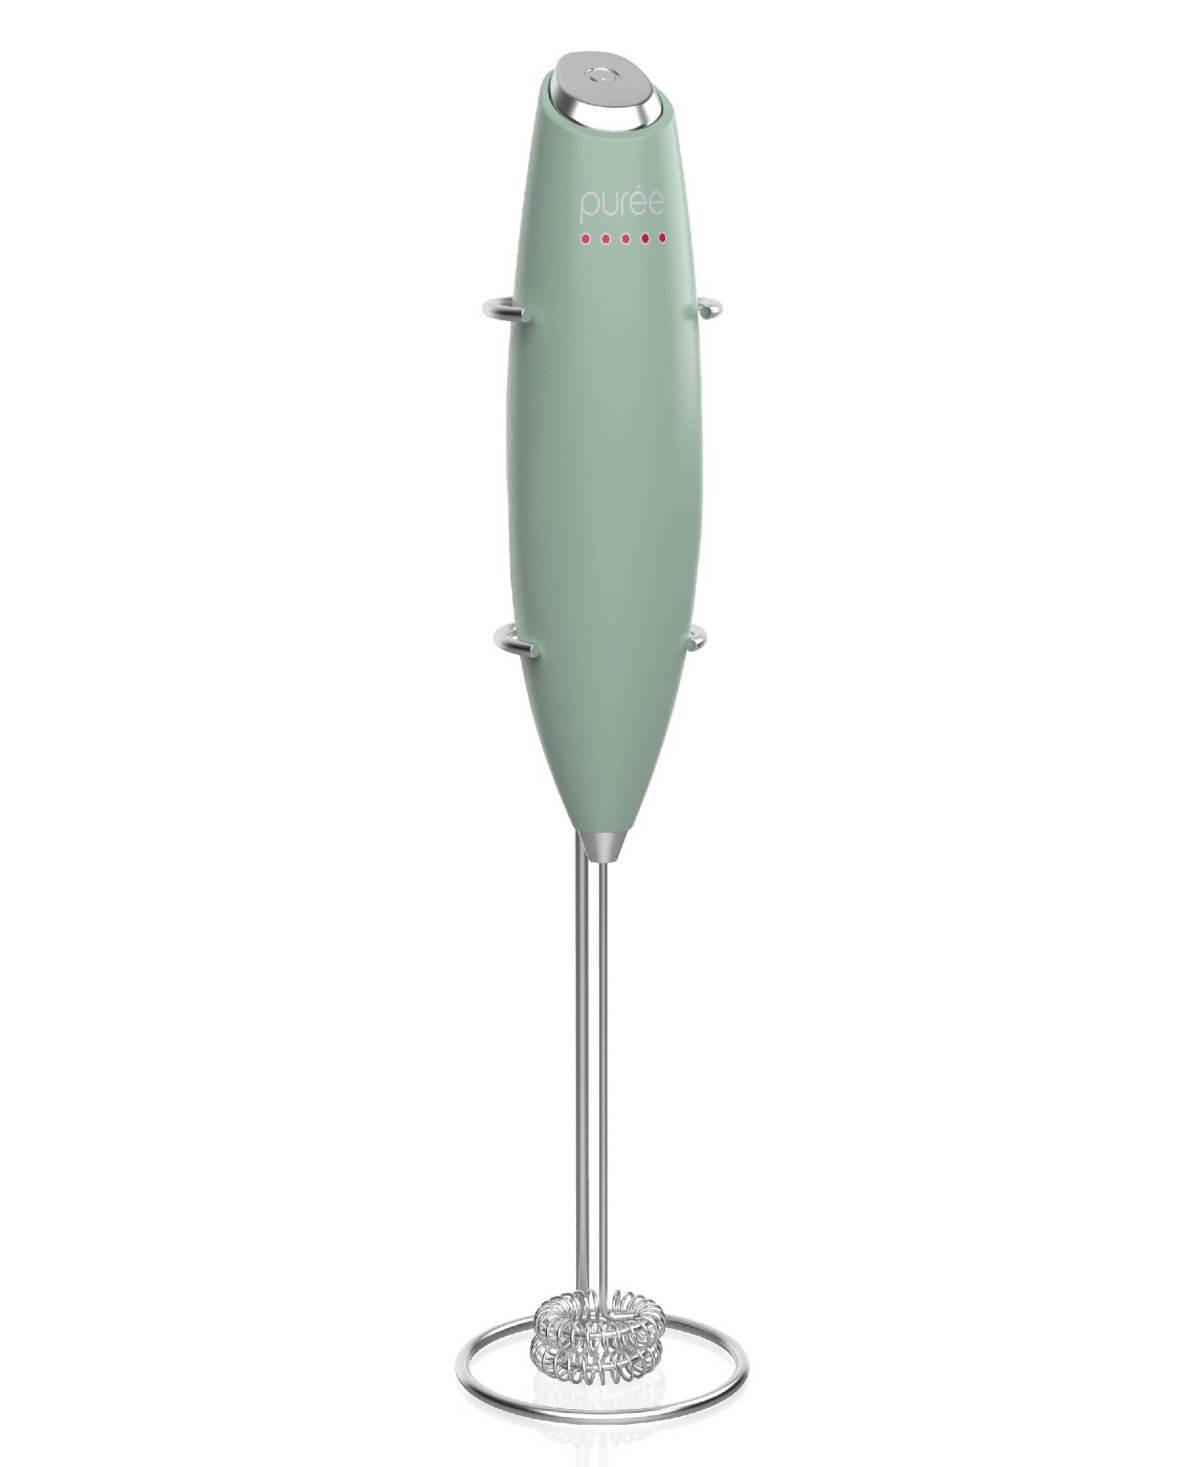 Tzumi Puree Milk Frother, Battery-powered Handheld Milk Frother Wand In Sage